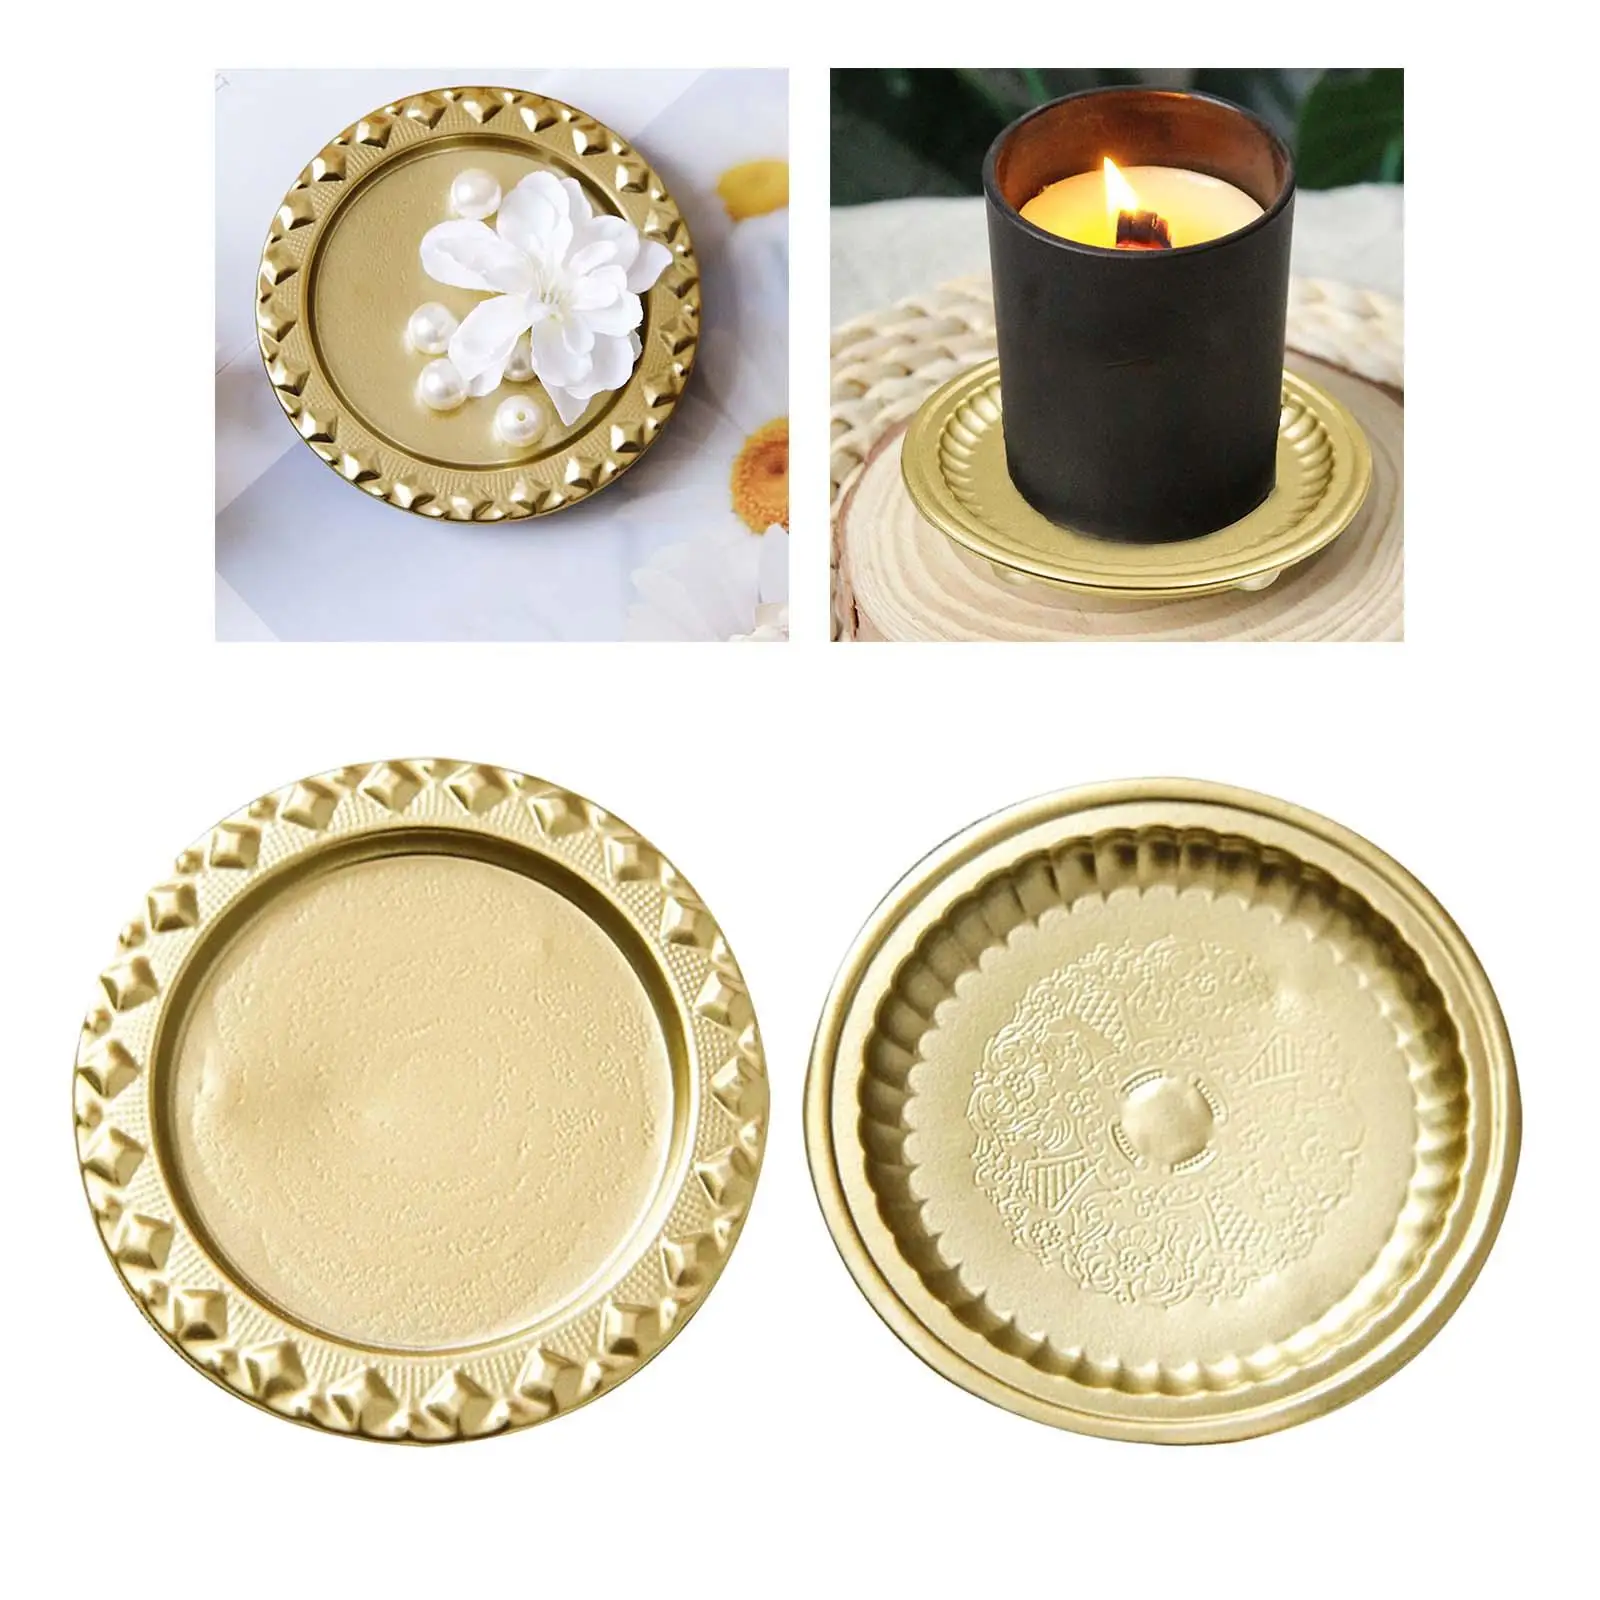 Gold Color Pillar Candle Holder Stand Round Bathroom Decor Durable Dia 4inch for Weddings, Parties, Special Events Candle Tray